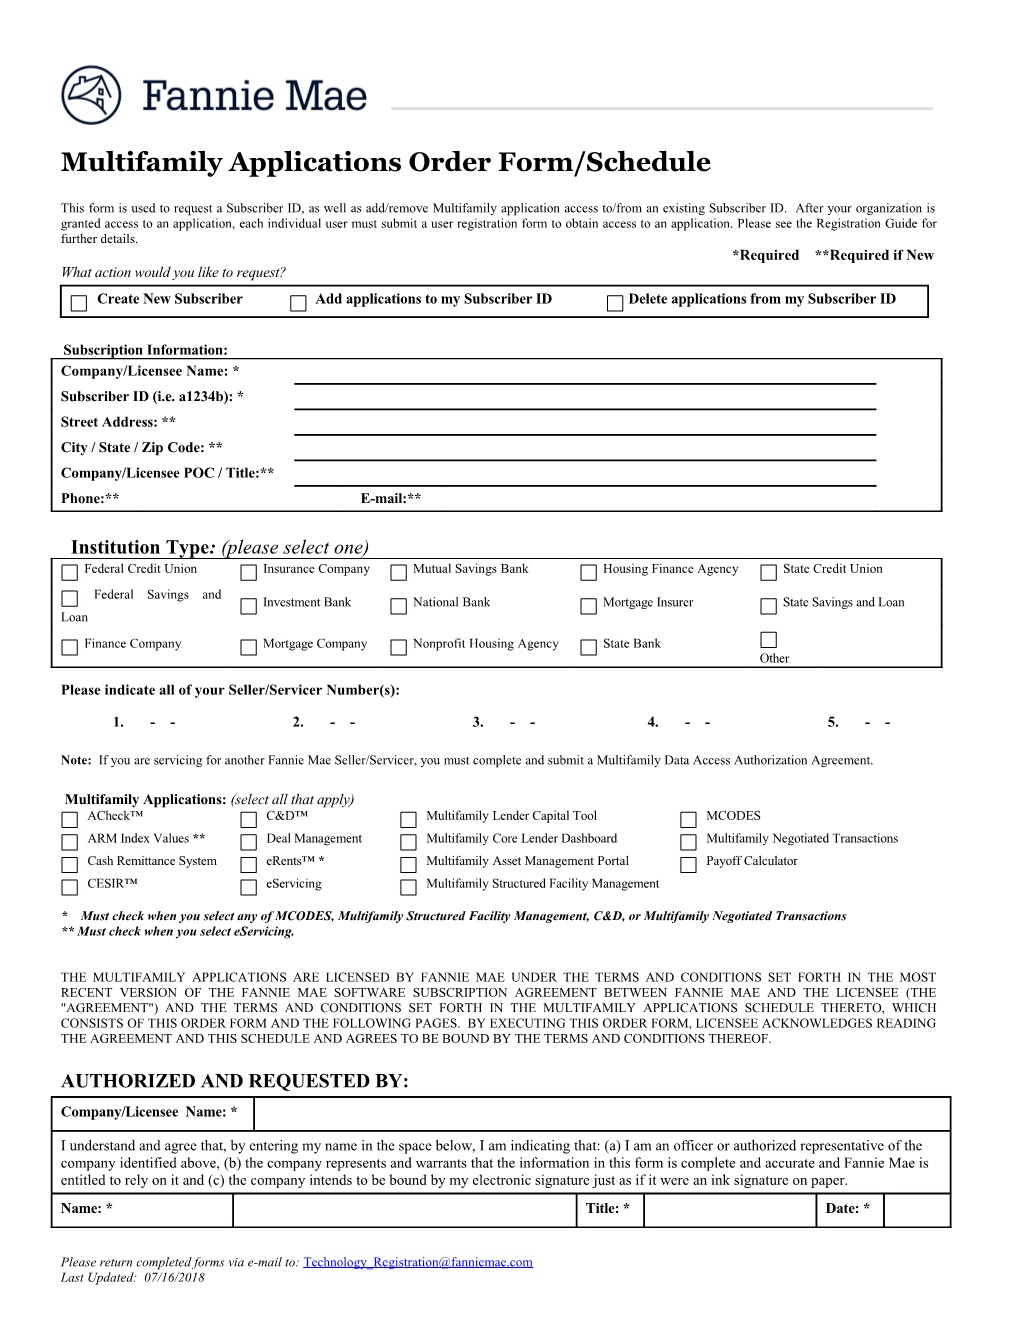 Multifamily Applications Order Form/Schedule